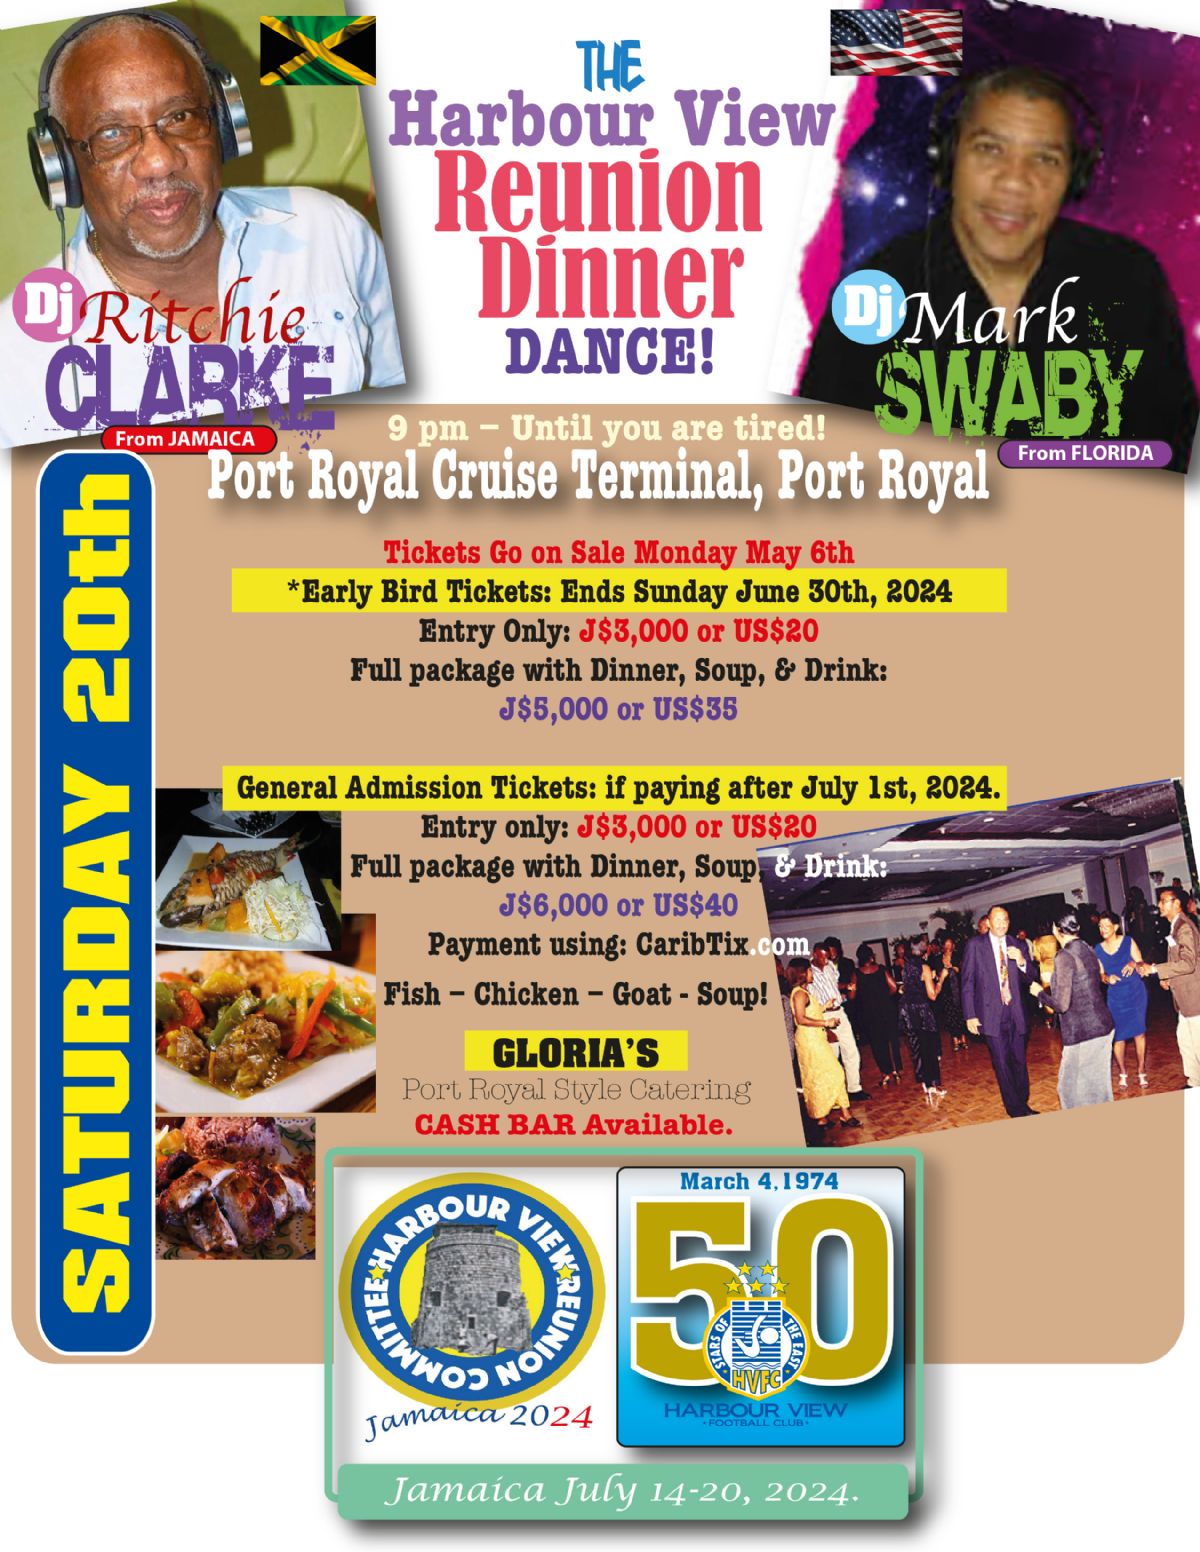 The Harbour View Reunion Dinner Dance Event Poster